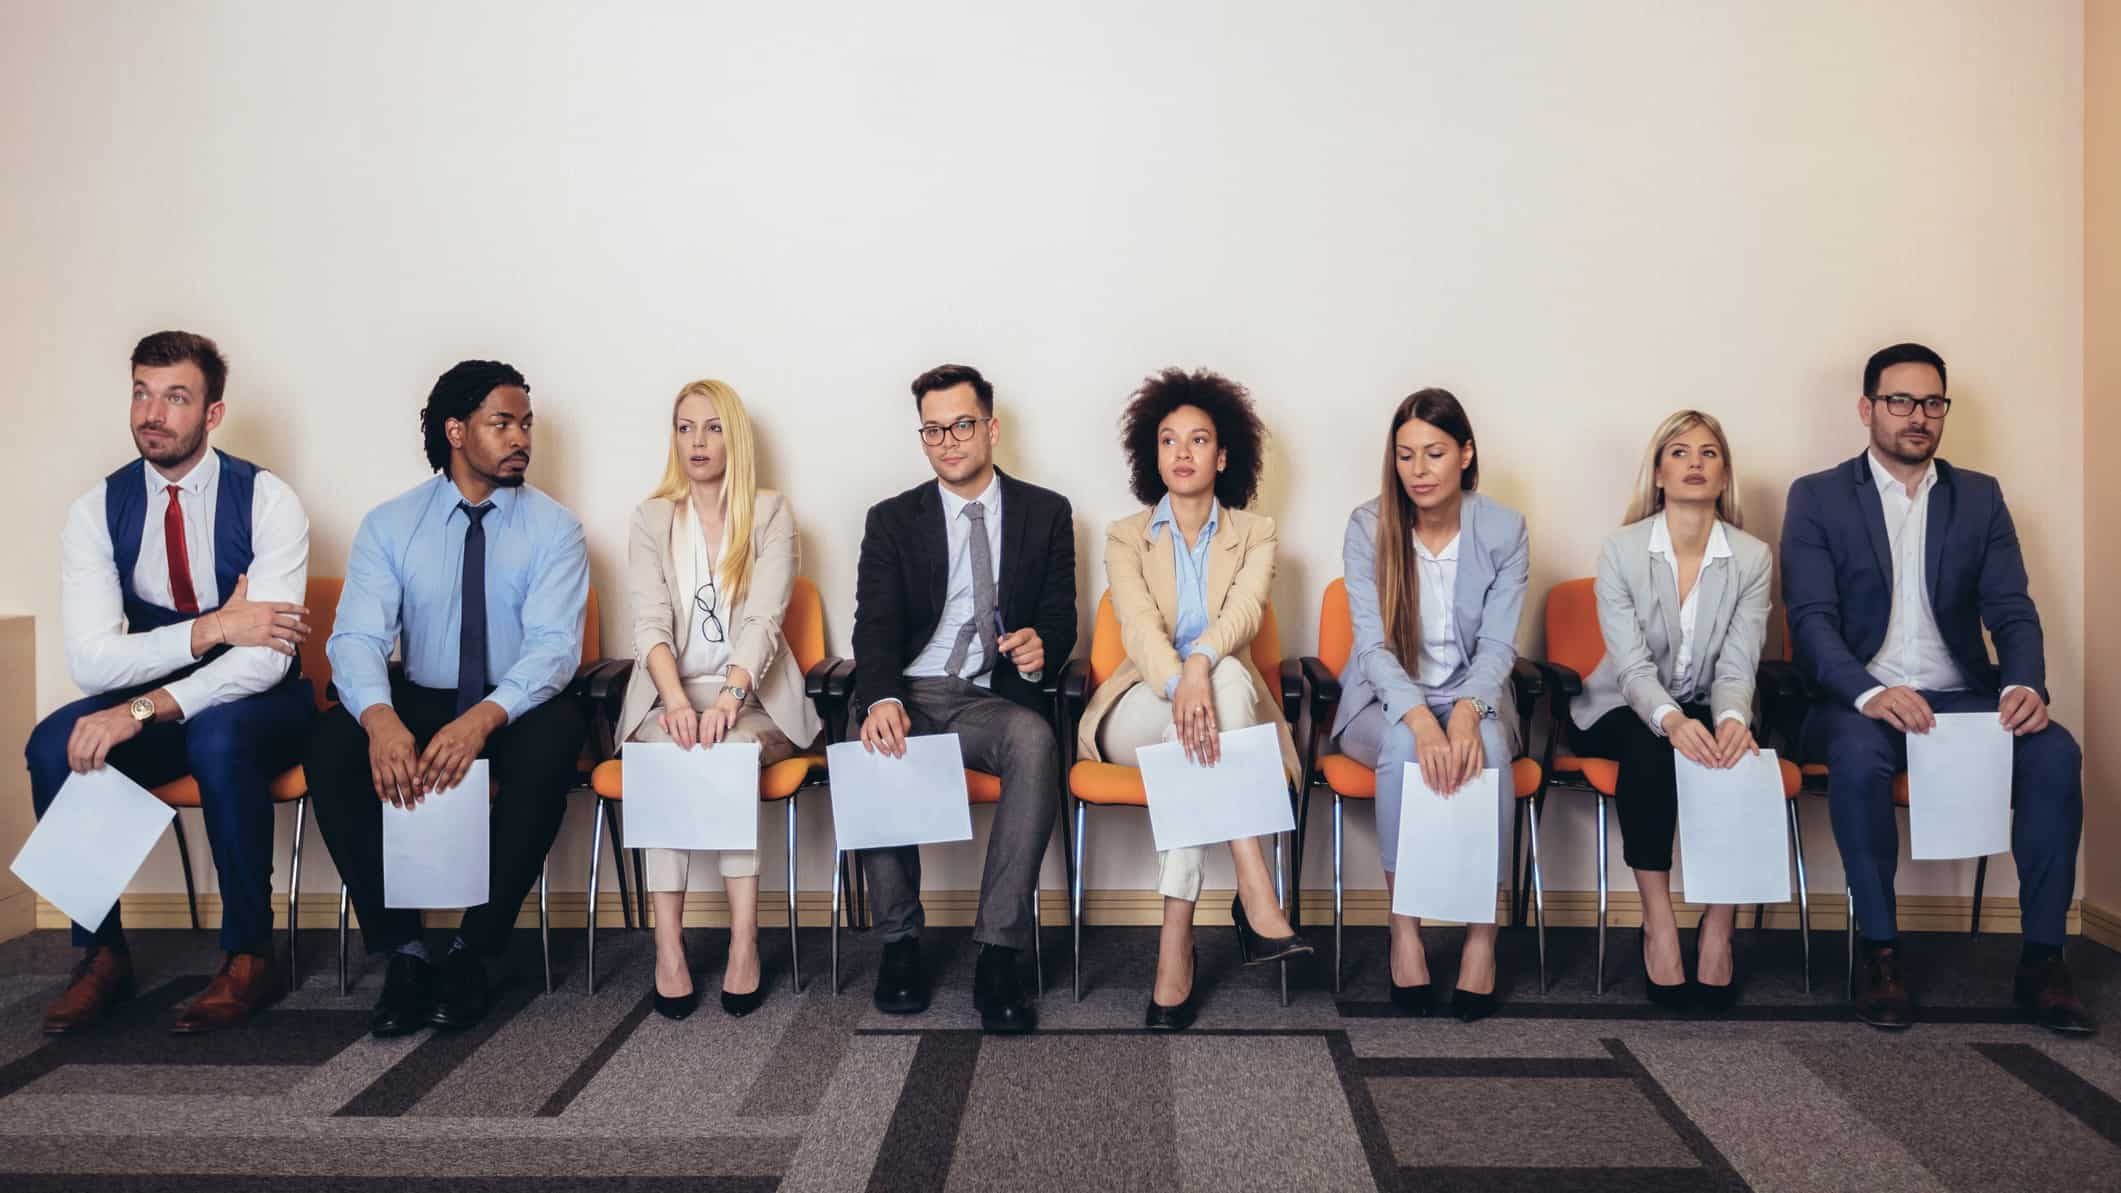 a line up of job interview candidates sit in chairs against a wall clutching CVs on paper in an office setting.